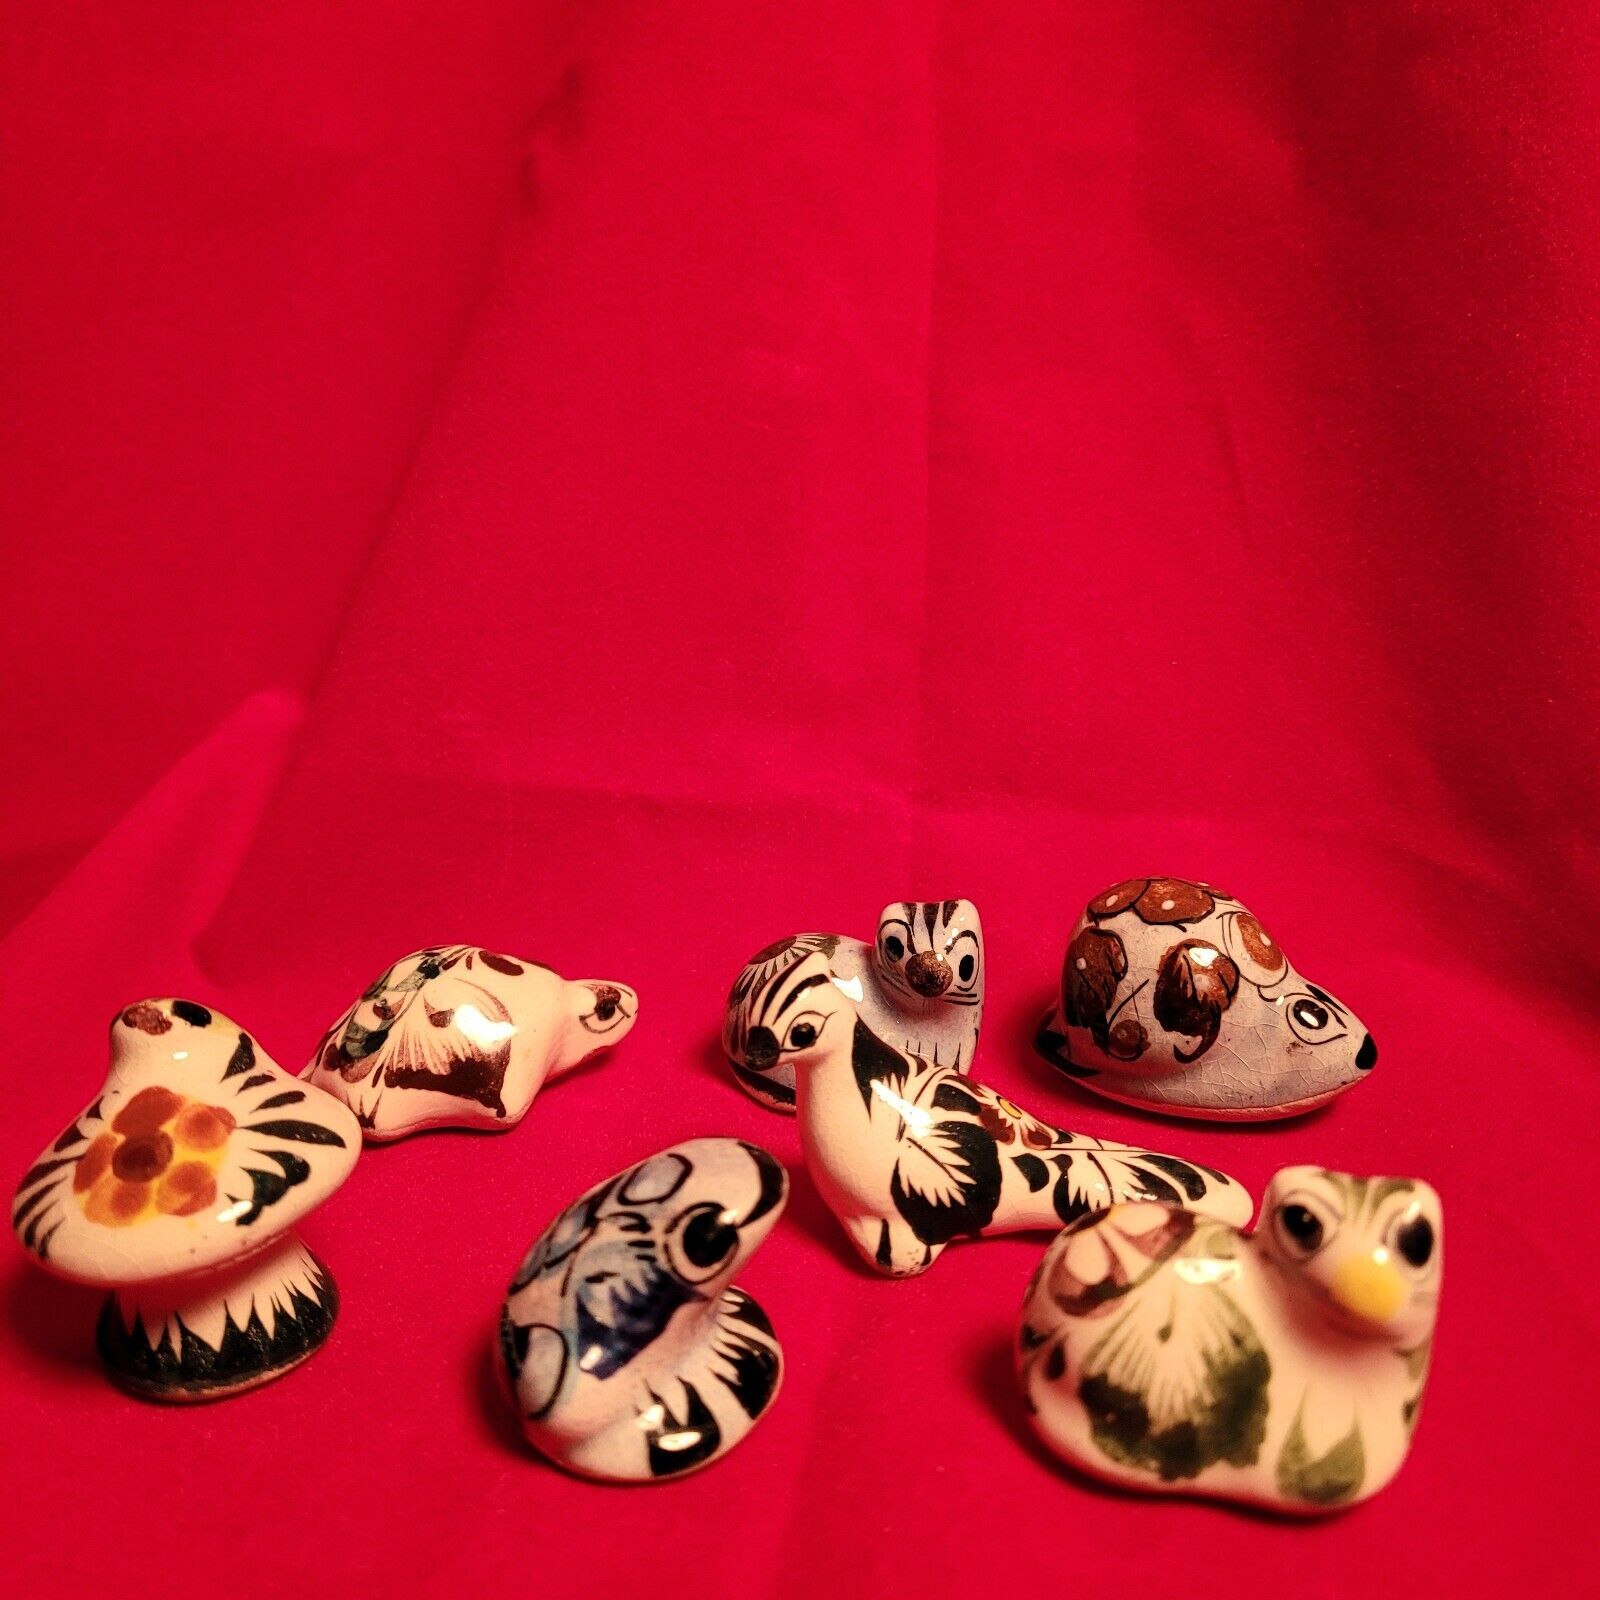 7 Vintage Tonala Mexican Pottery Ceramic bird turtle frog cat Hand Painted